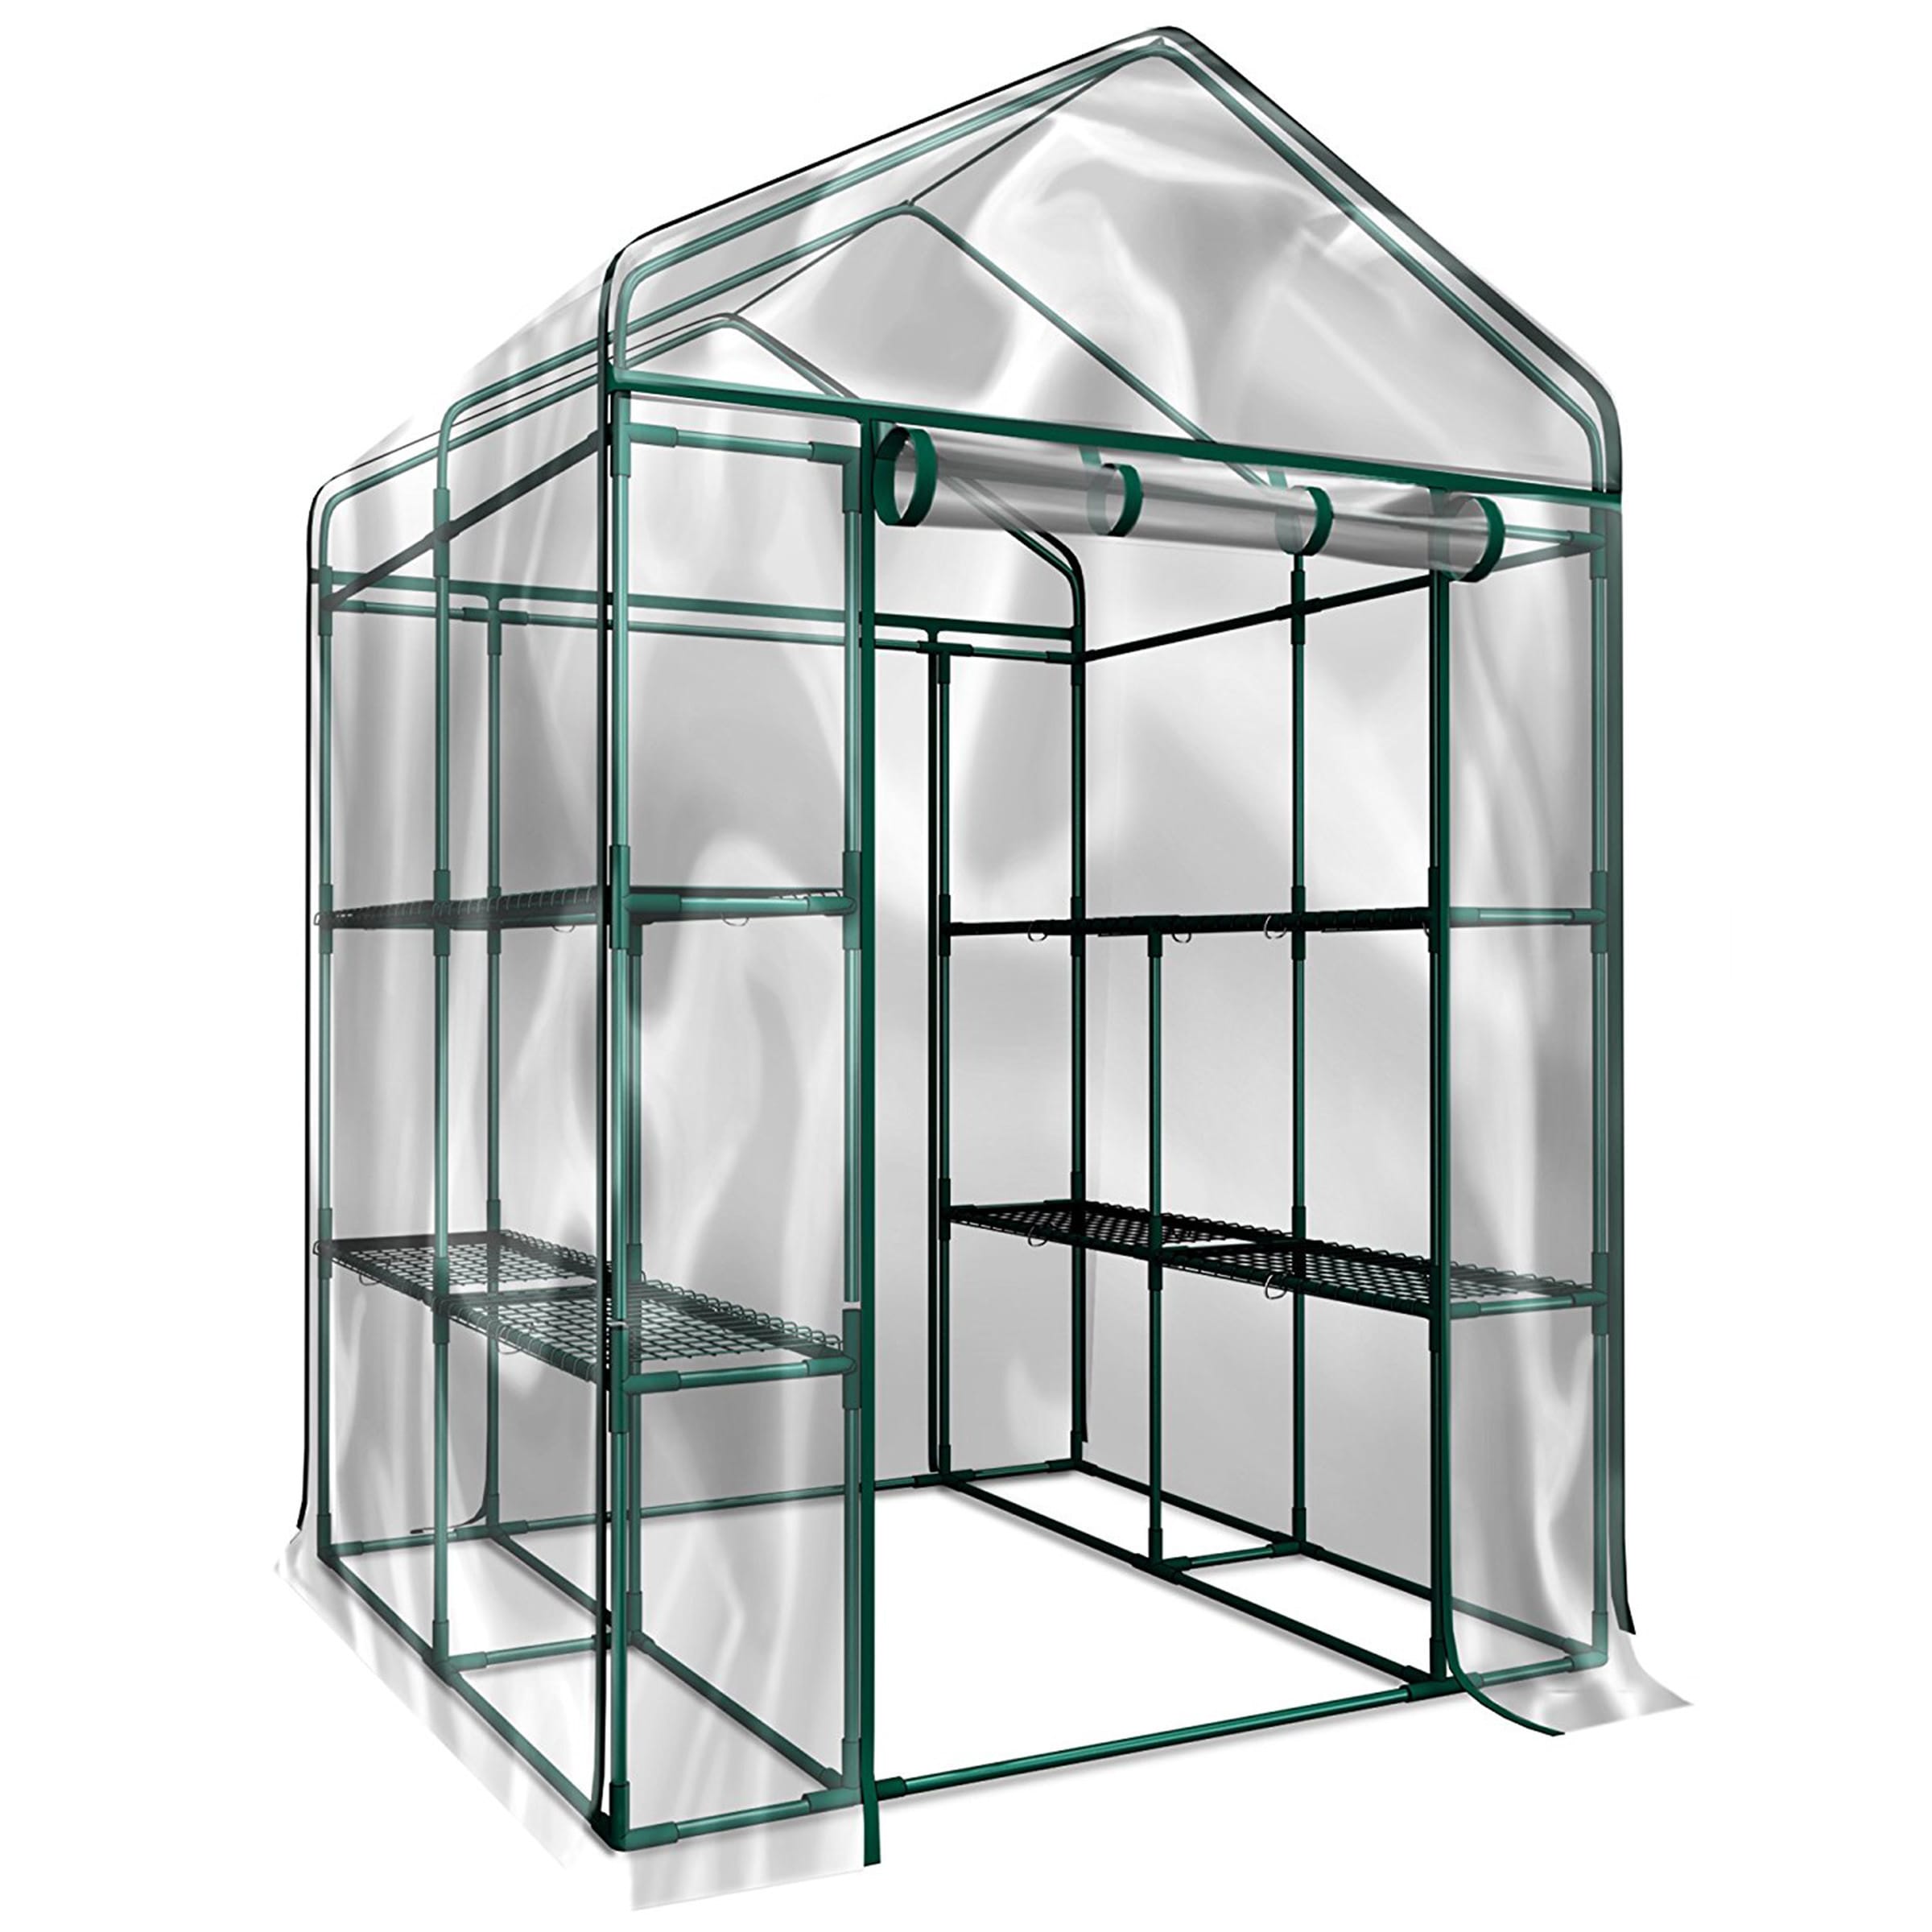 G19 5 Shelf 2 Zip Front Covers Greenhouse Heavy Duty Removeable PVC Cover New. 